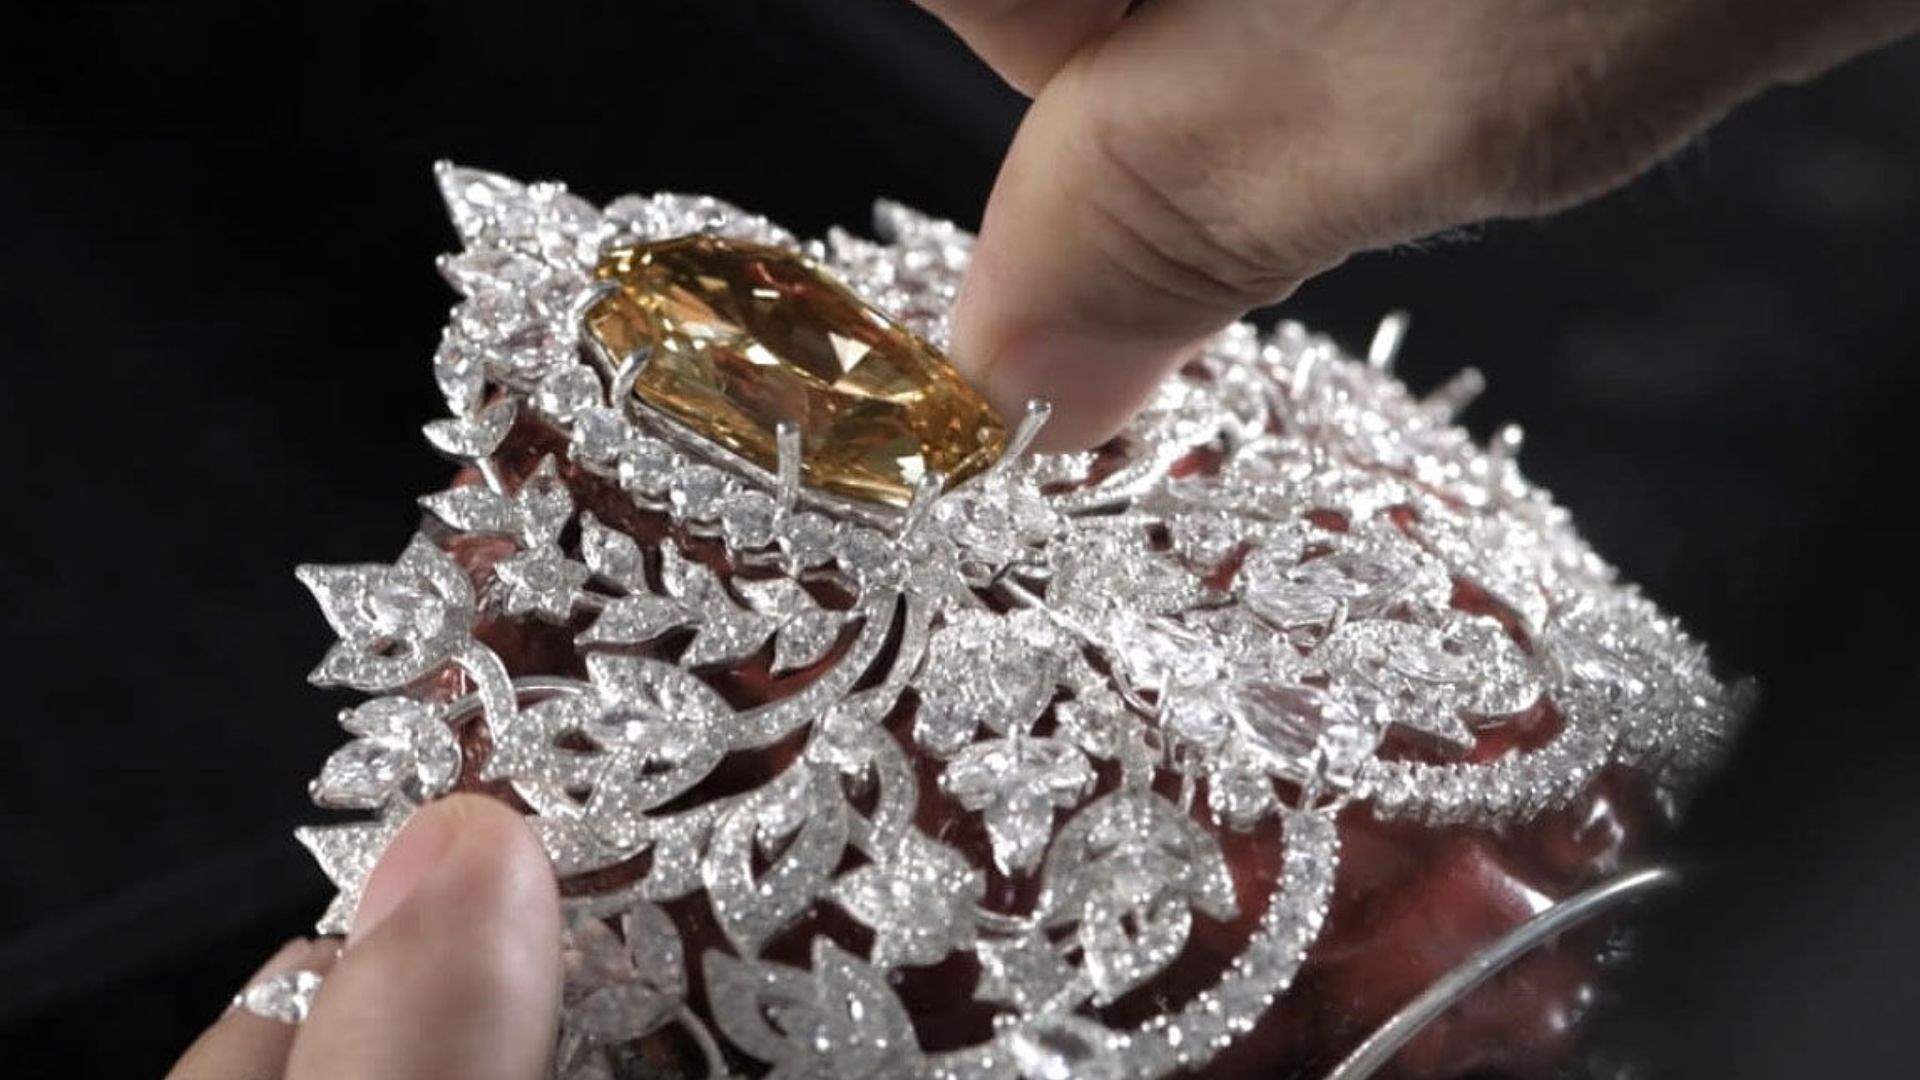 Beyond borders: Lebanon&#39;s jewelry industry shines with $752 million in exports